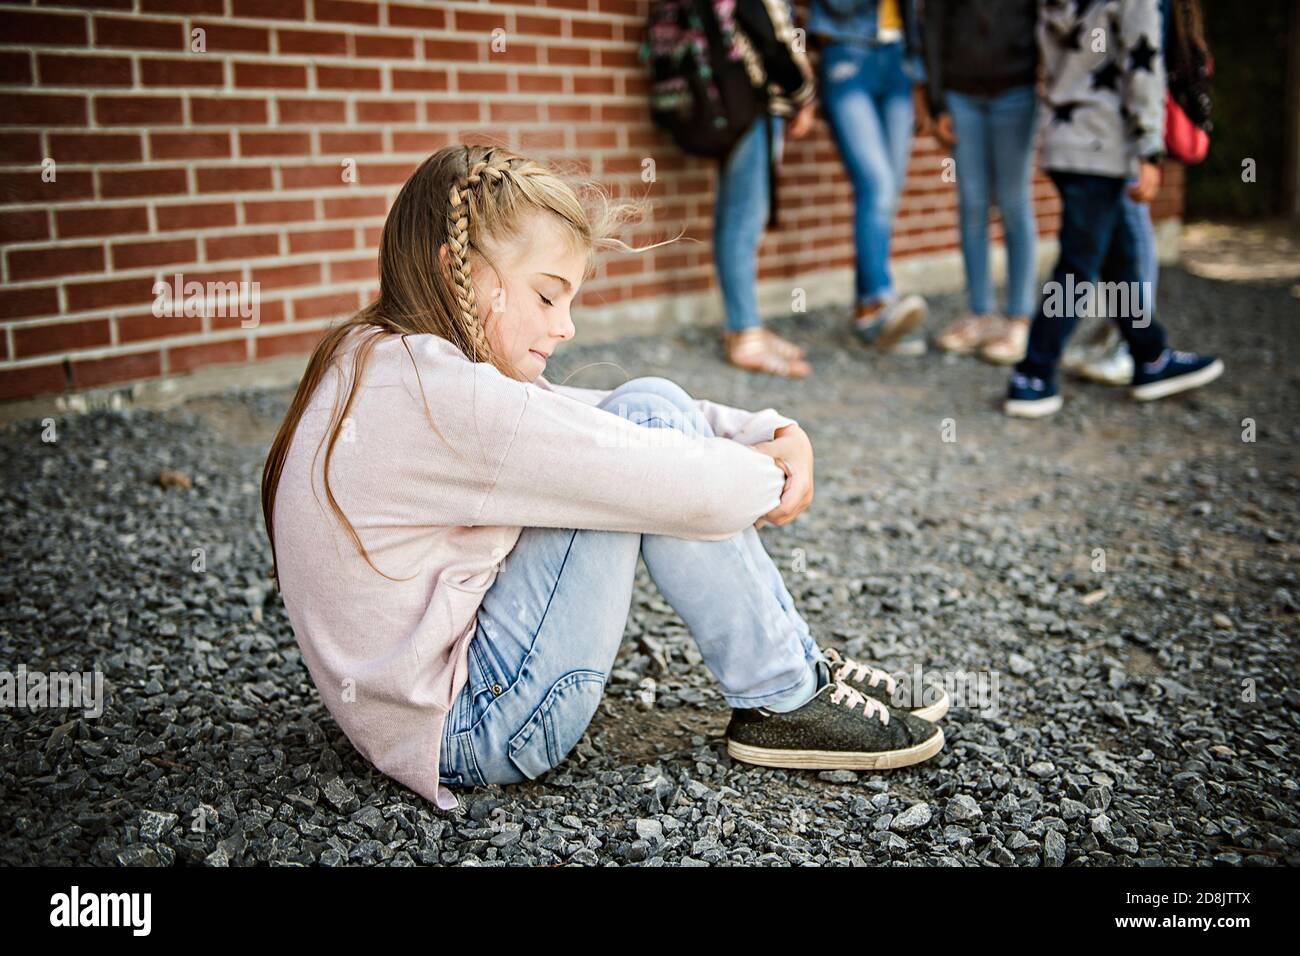 sad intimidation moment Elementary Age Bullying in Schoolyard Stock ...